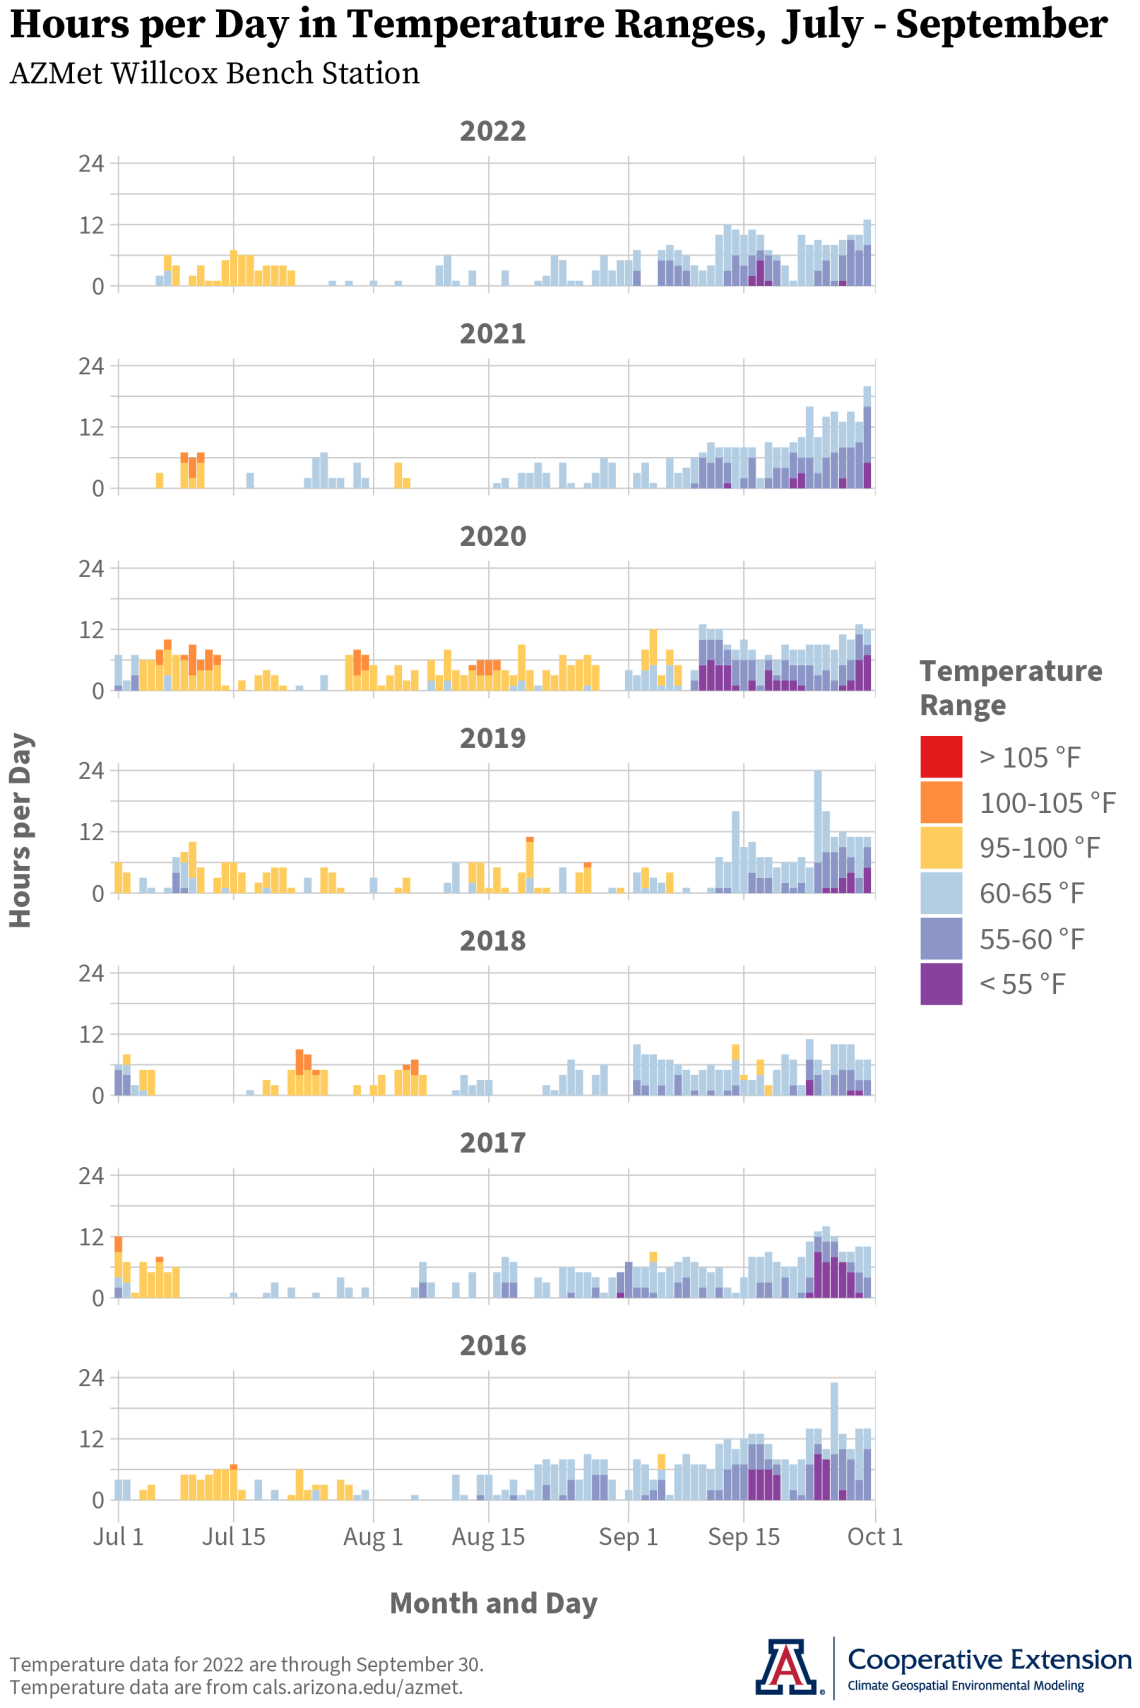 July-September temperature graphs from AZMet Willcox Bench station